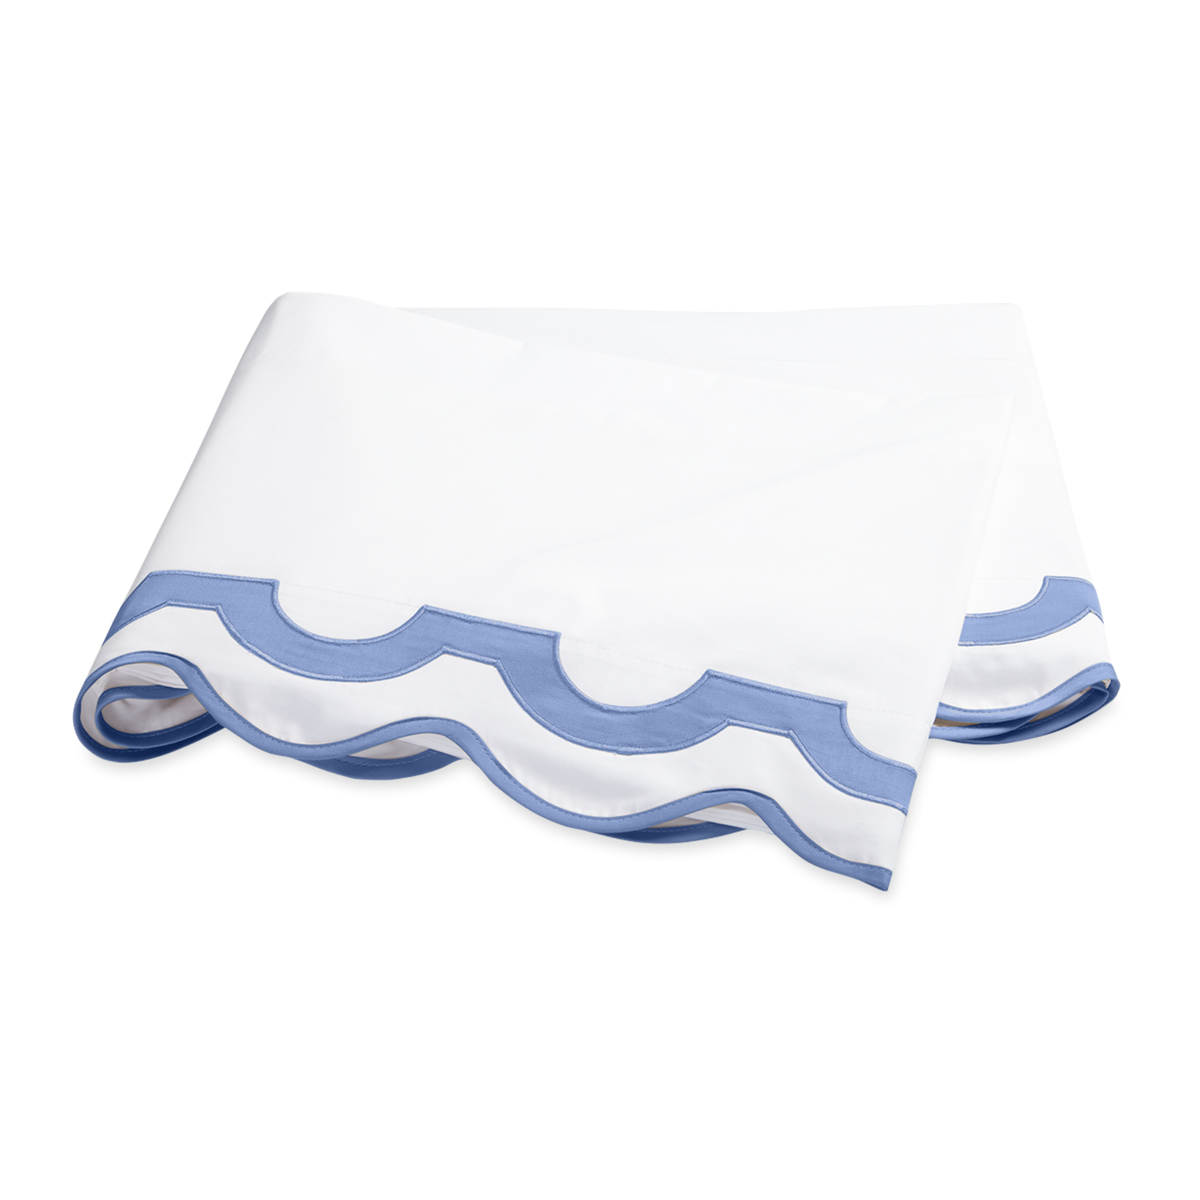 Folded Flat Sheet of Matouk Mirasol Collection in Azure Color